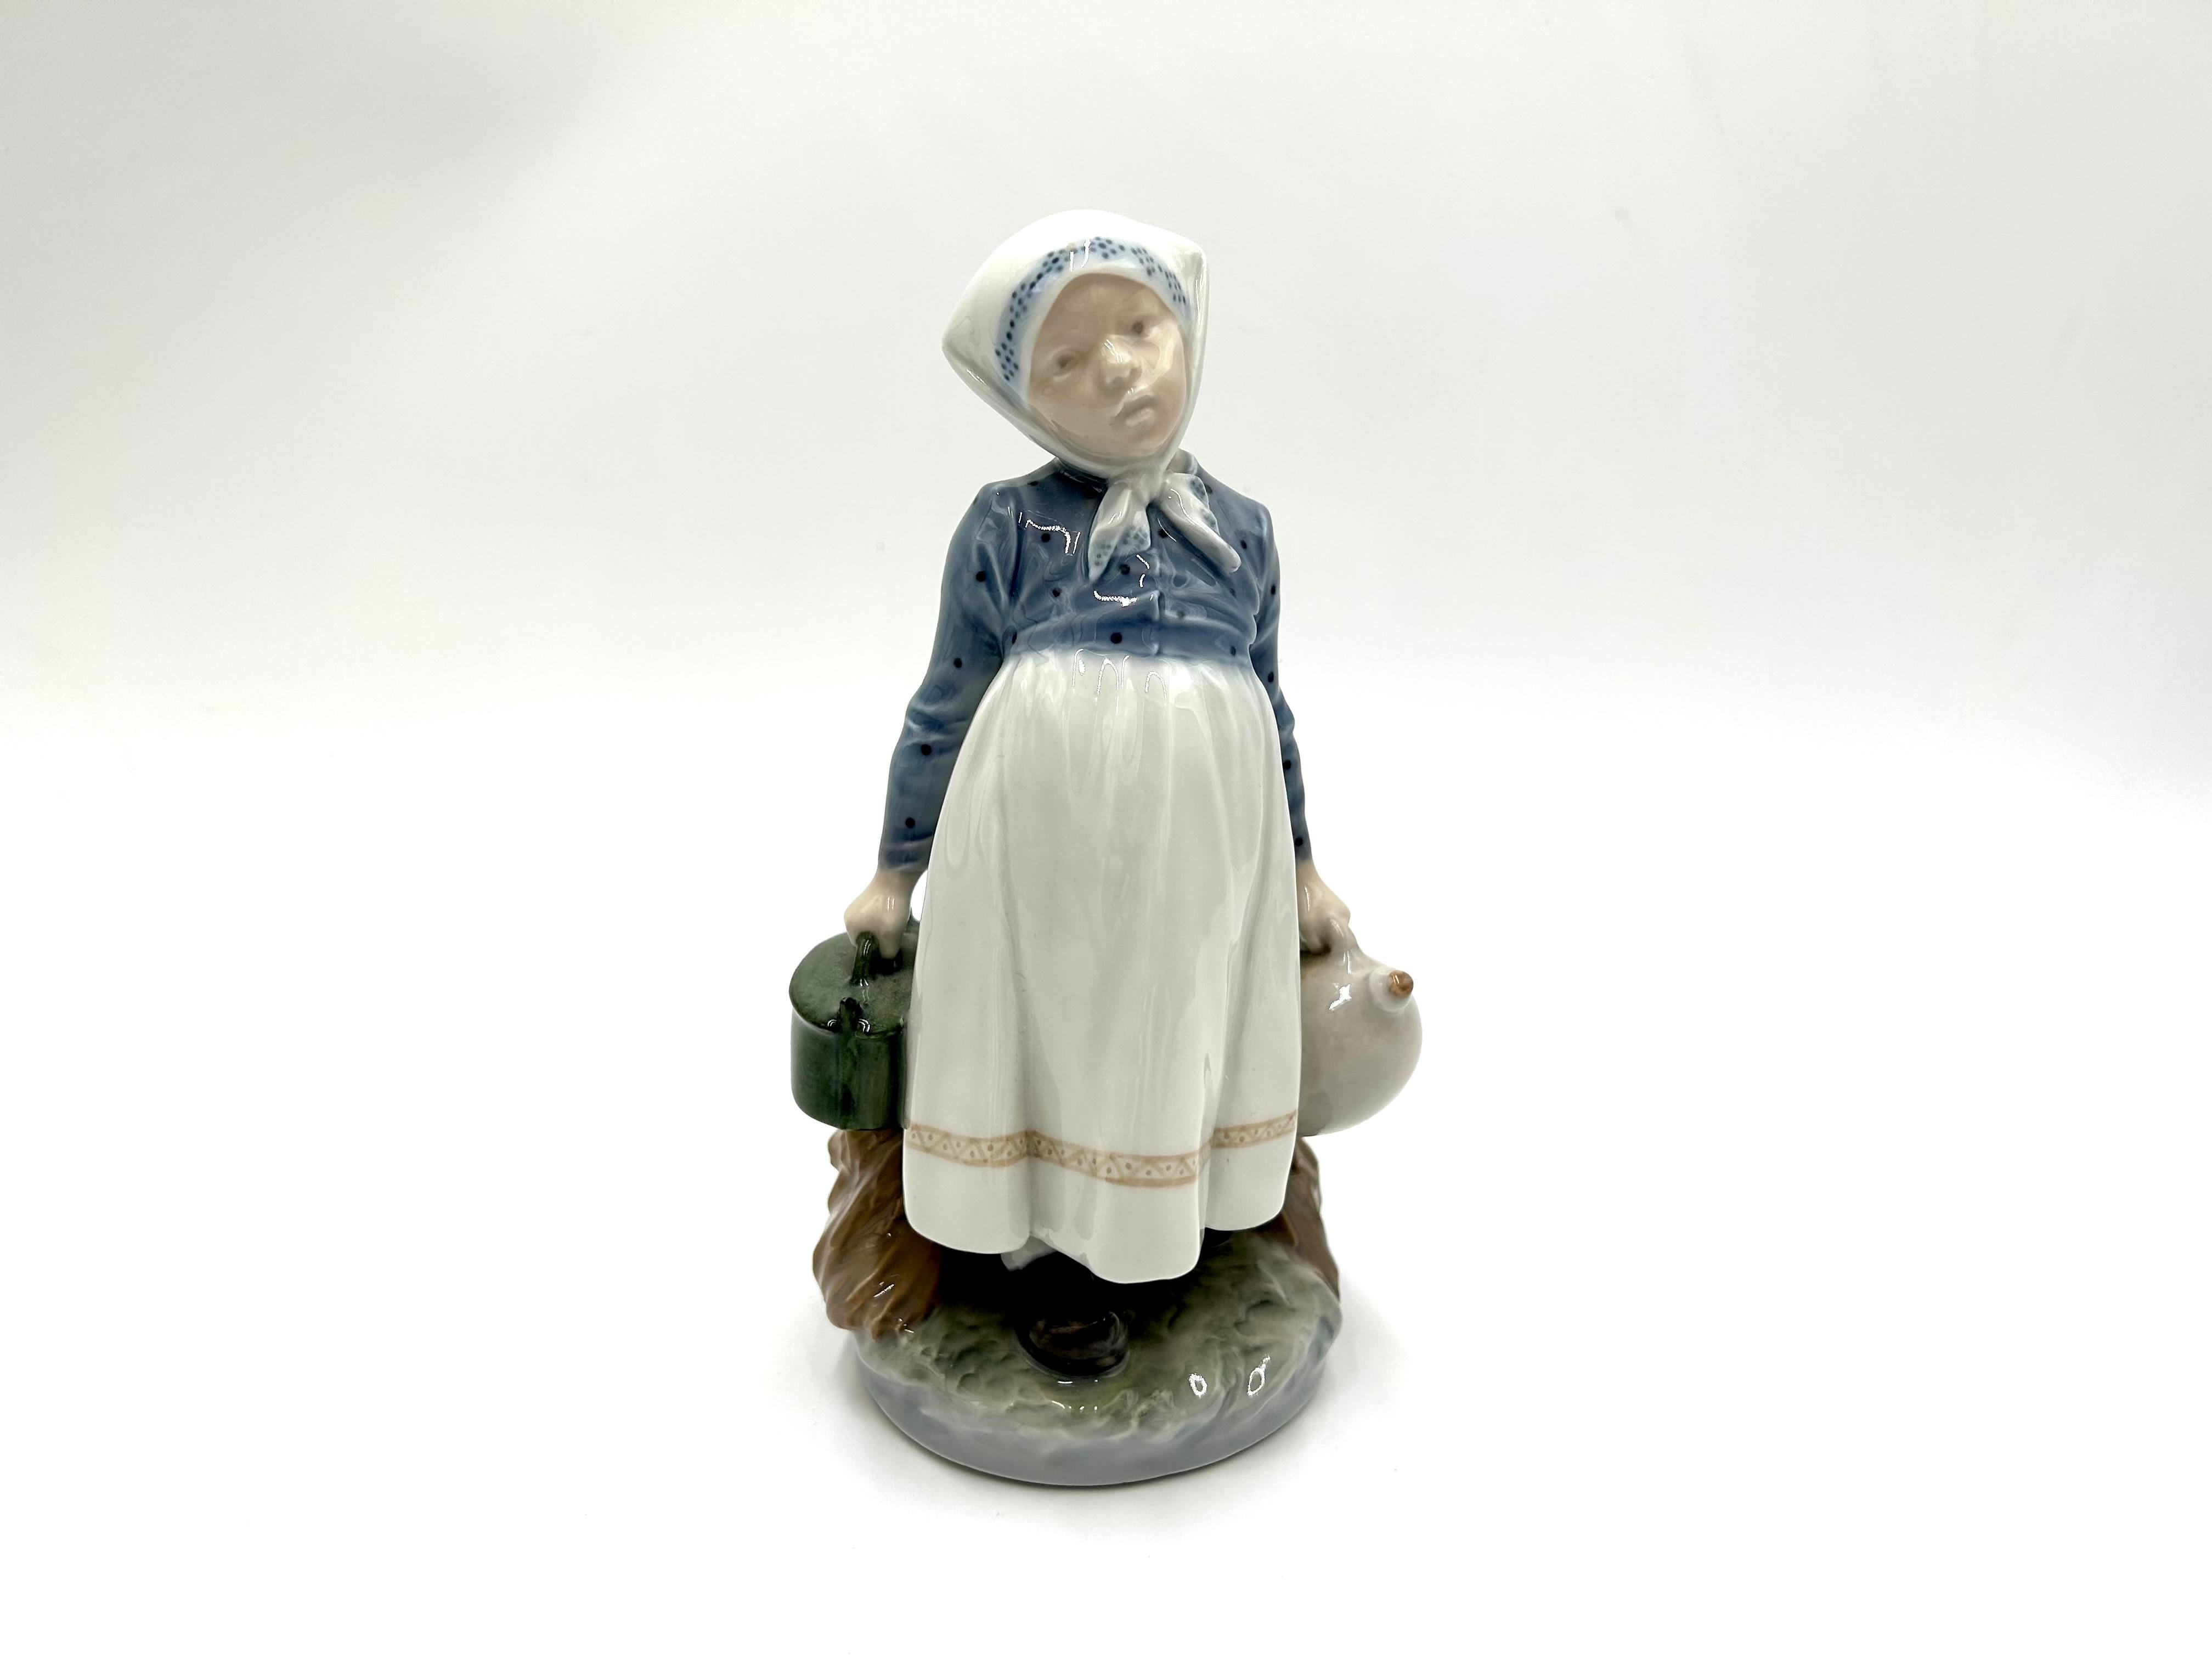 Porcelain figurine of a peasant girl
Produced by the Danish manufacture Royal Copenhagen
Signature uses 1974-1978
Very good condition without damage
height: 22cm
diameter: 11cm.